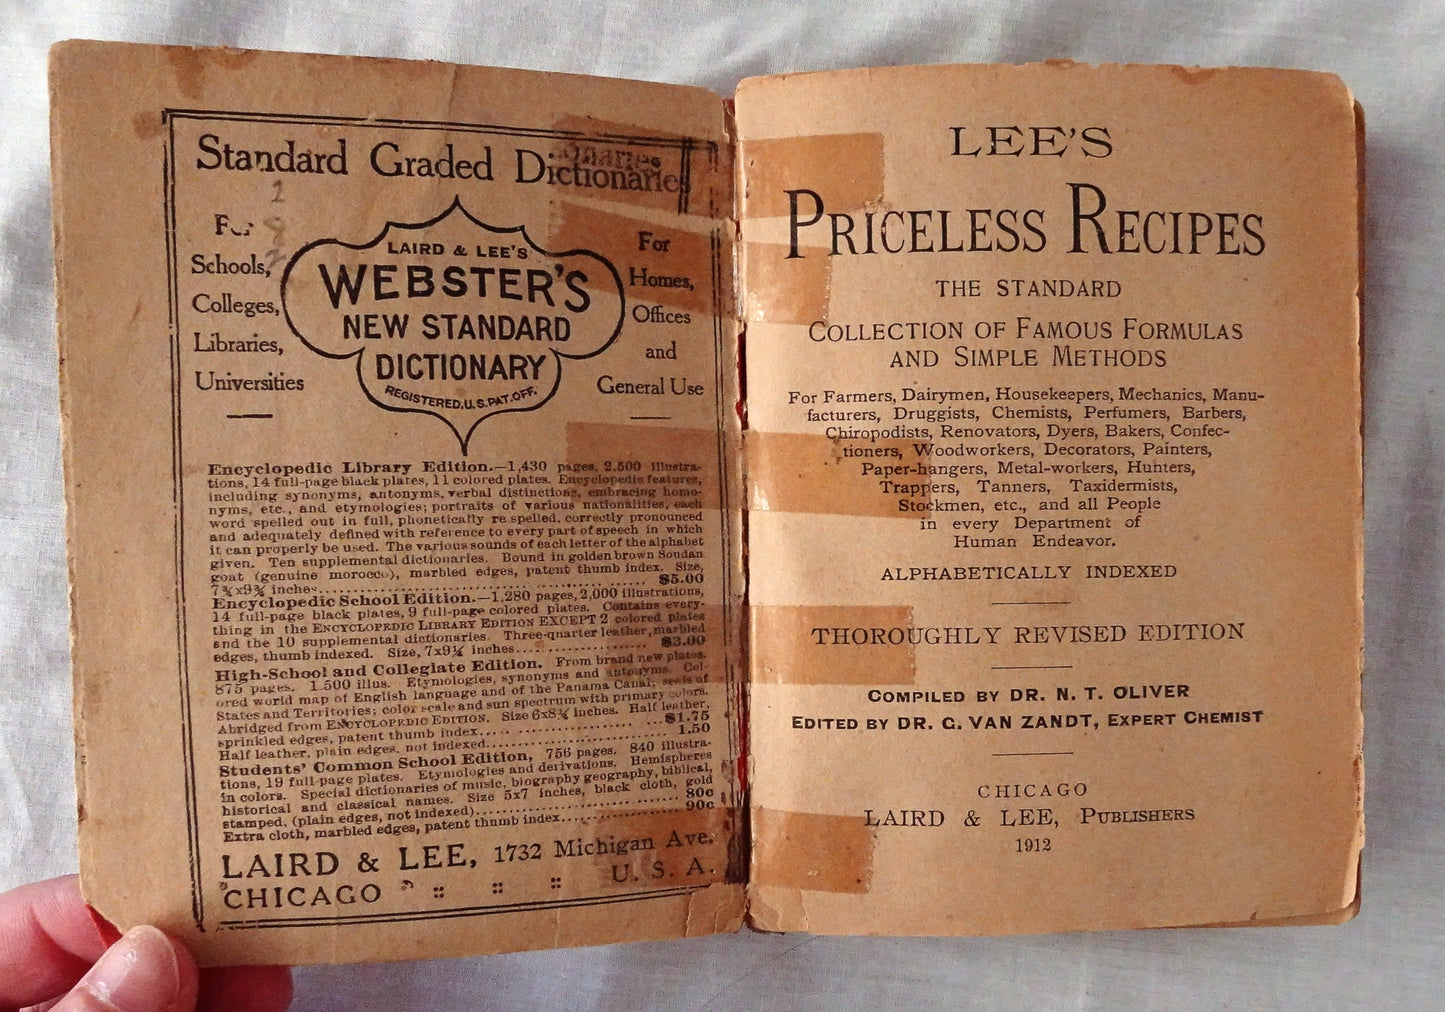 Lee’s Priceless Recipes Compiled by Dr. N. T. Oliver